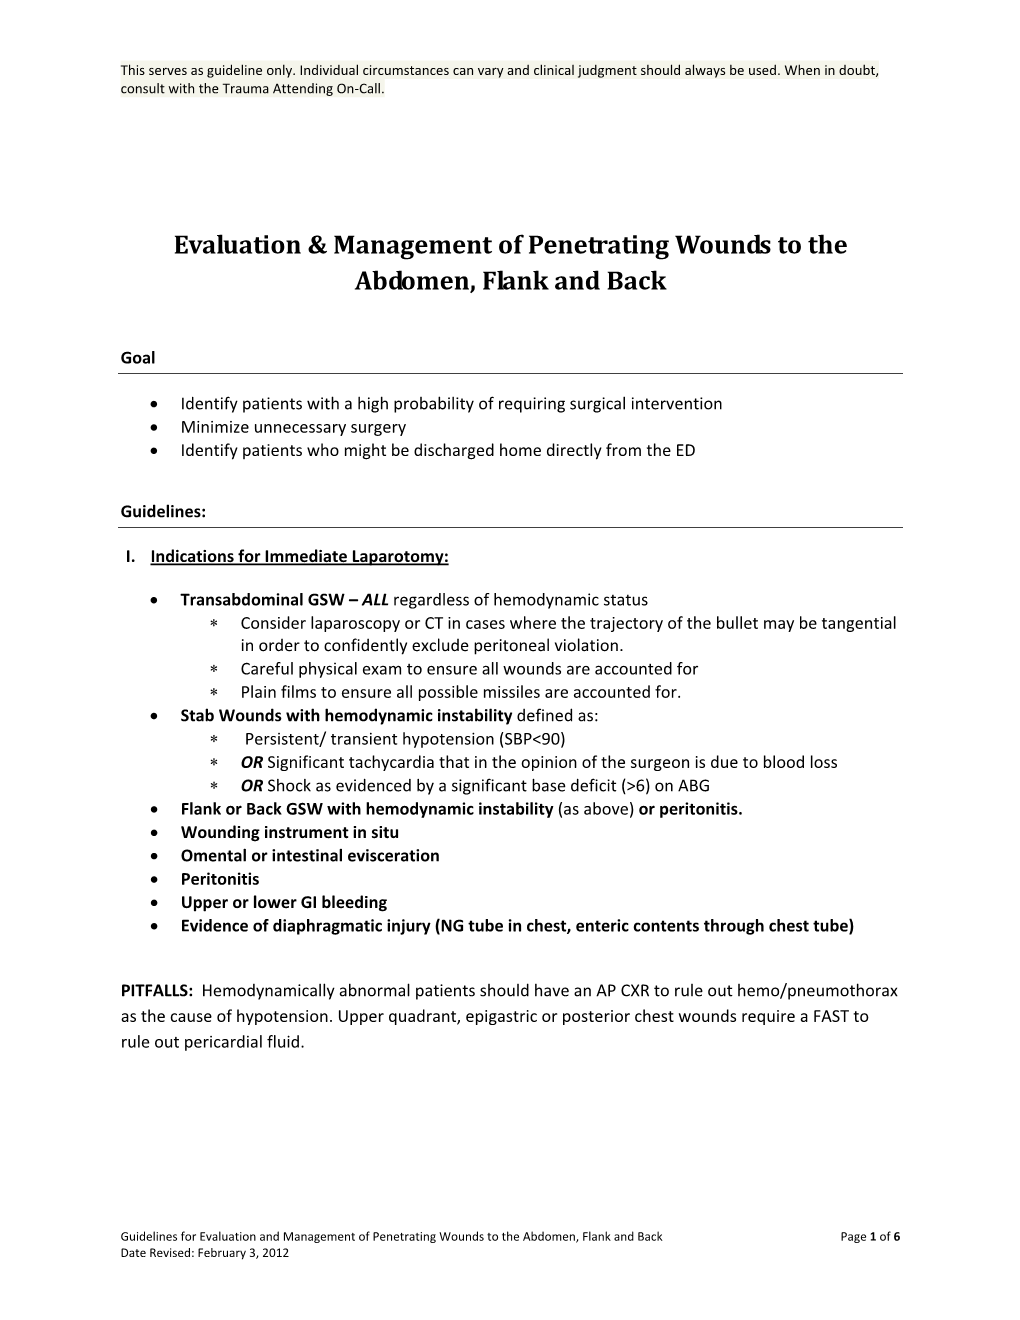 Evaluation & Management of Penetrating Wounds to the Abdomen, Flank and Back